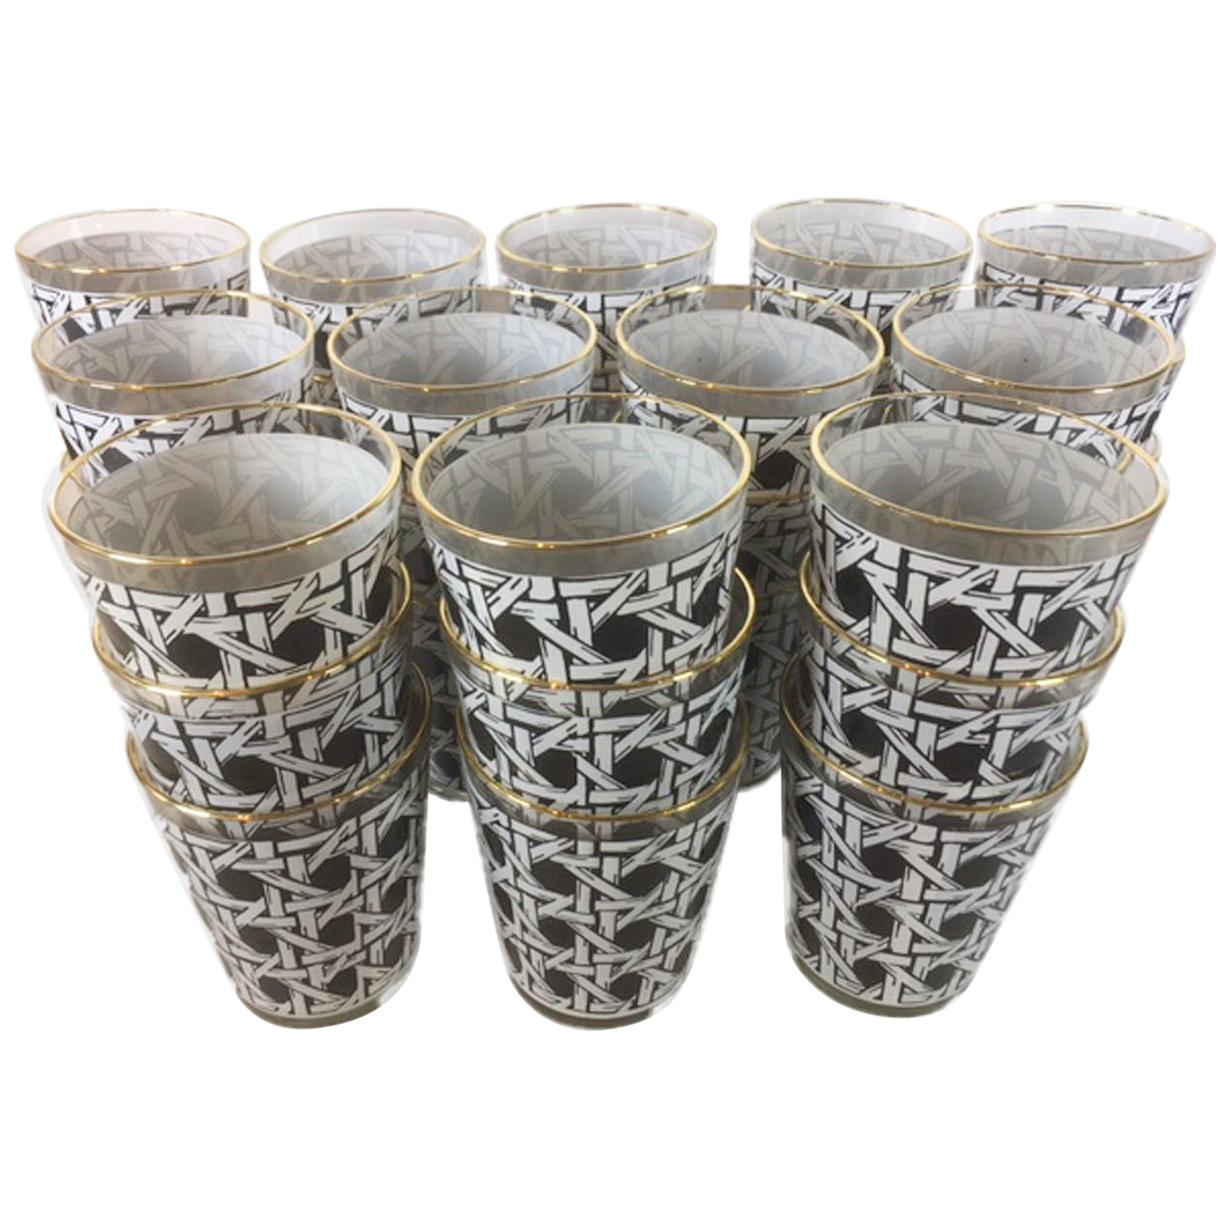 Vintage, 36 Black and White Cane Pattern Double Old Fashioned Glasses & Ice Bowl